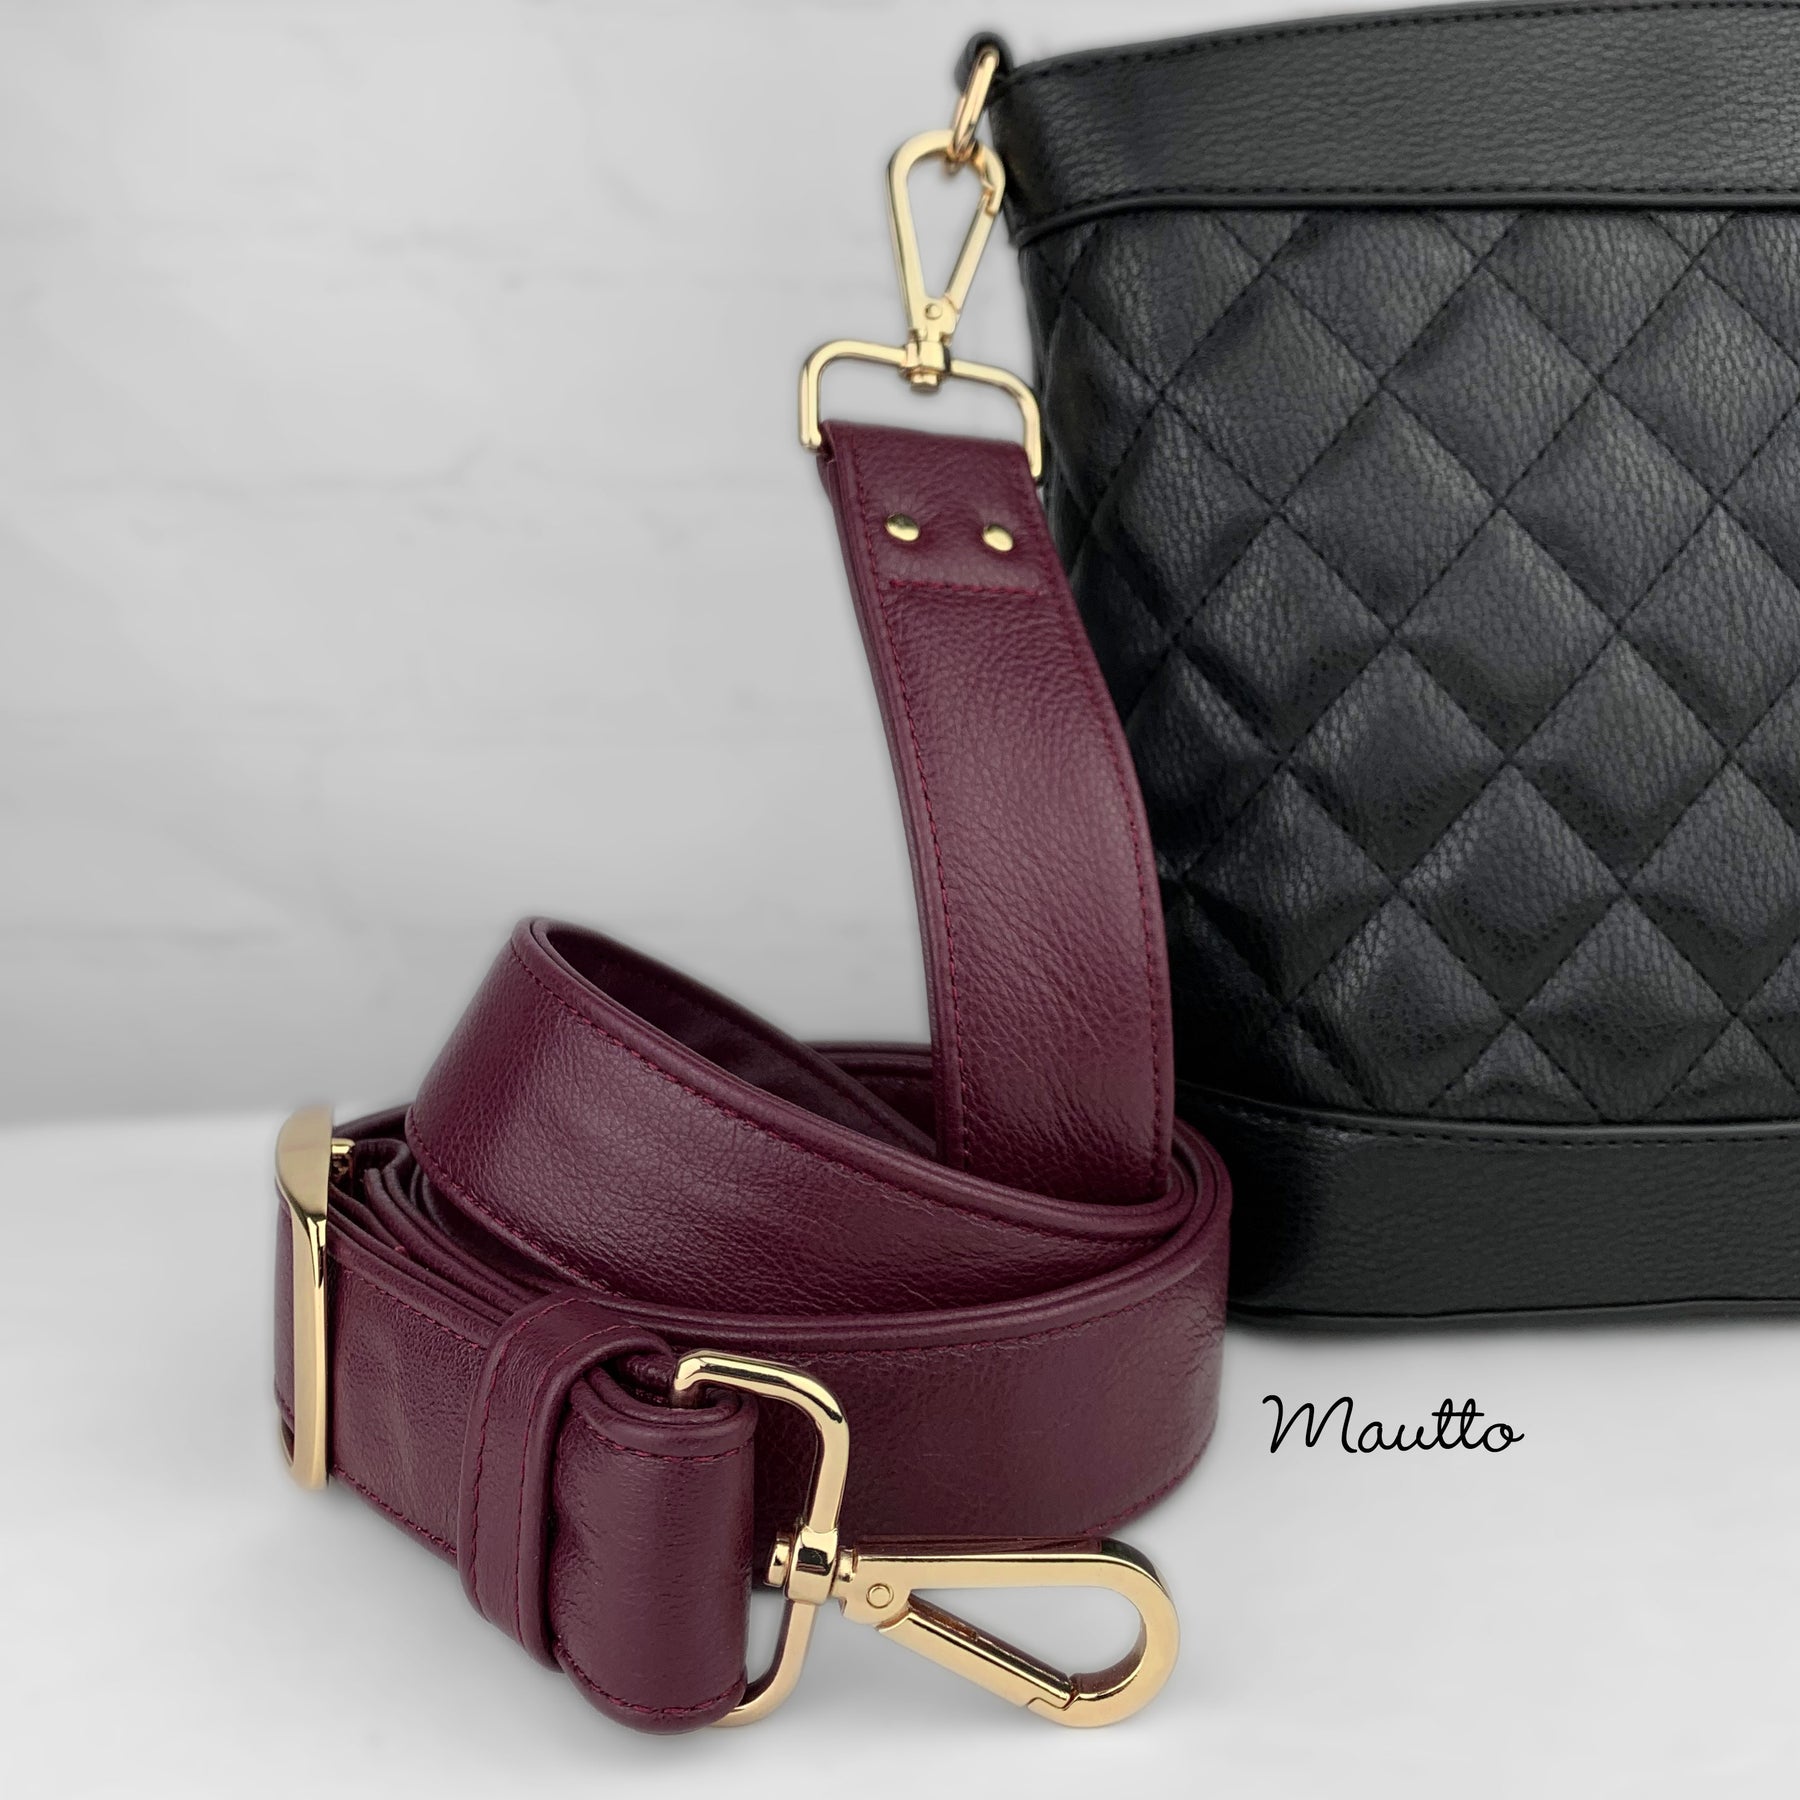 Wide/Comfortable Leather Adjustable Strap - Shoulder to Crossbody Brown Leather / #19 Gold-Tone